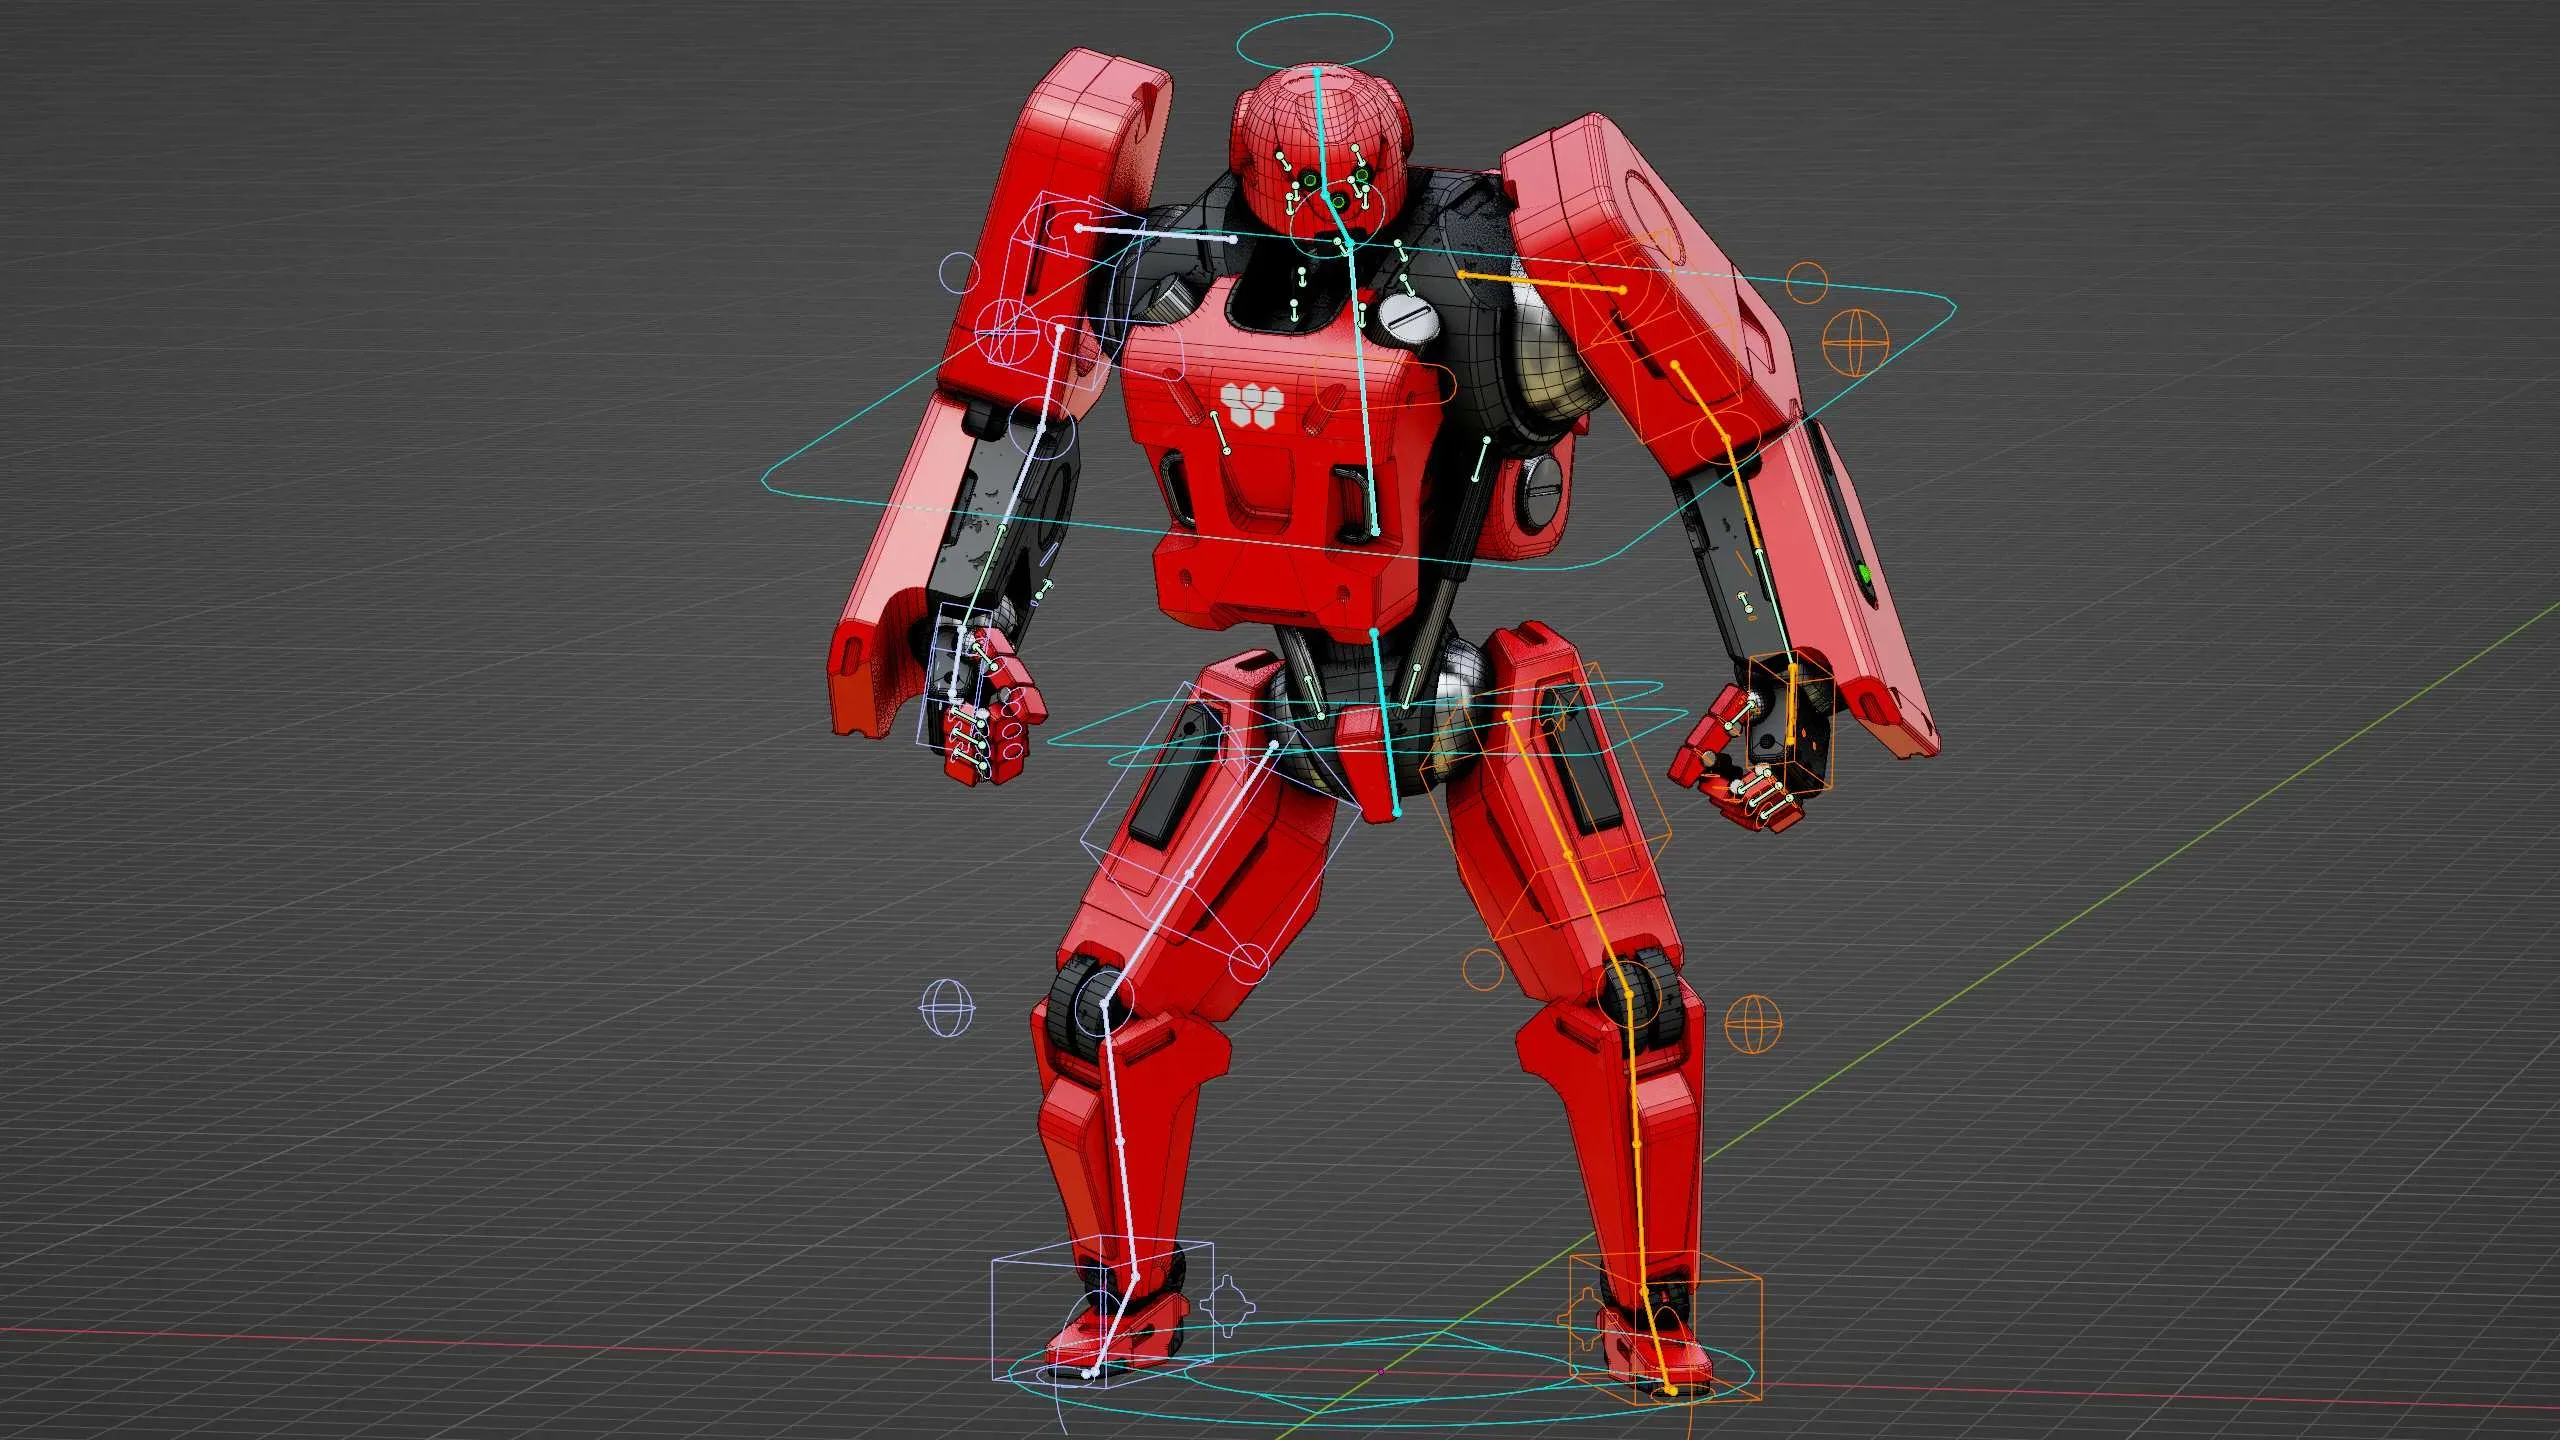 Mecha Soldier X Auto-Rig Pro Rigged For Mixamo, Unreal Engine Unity